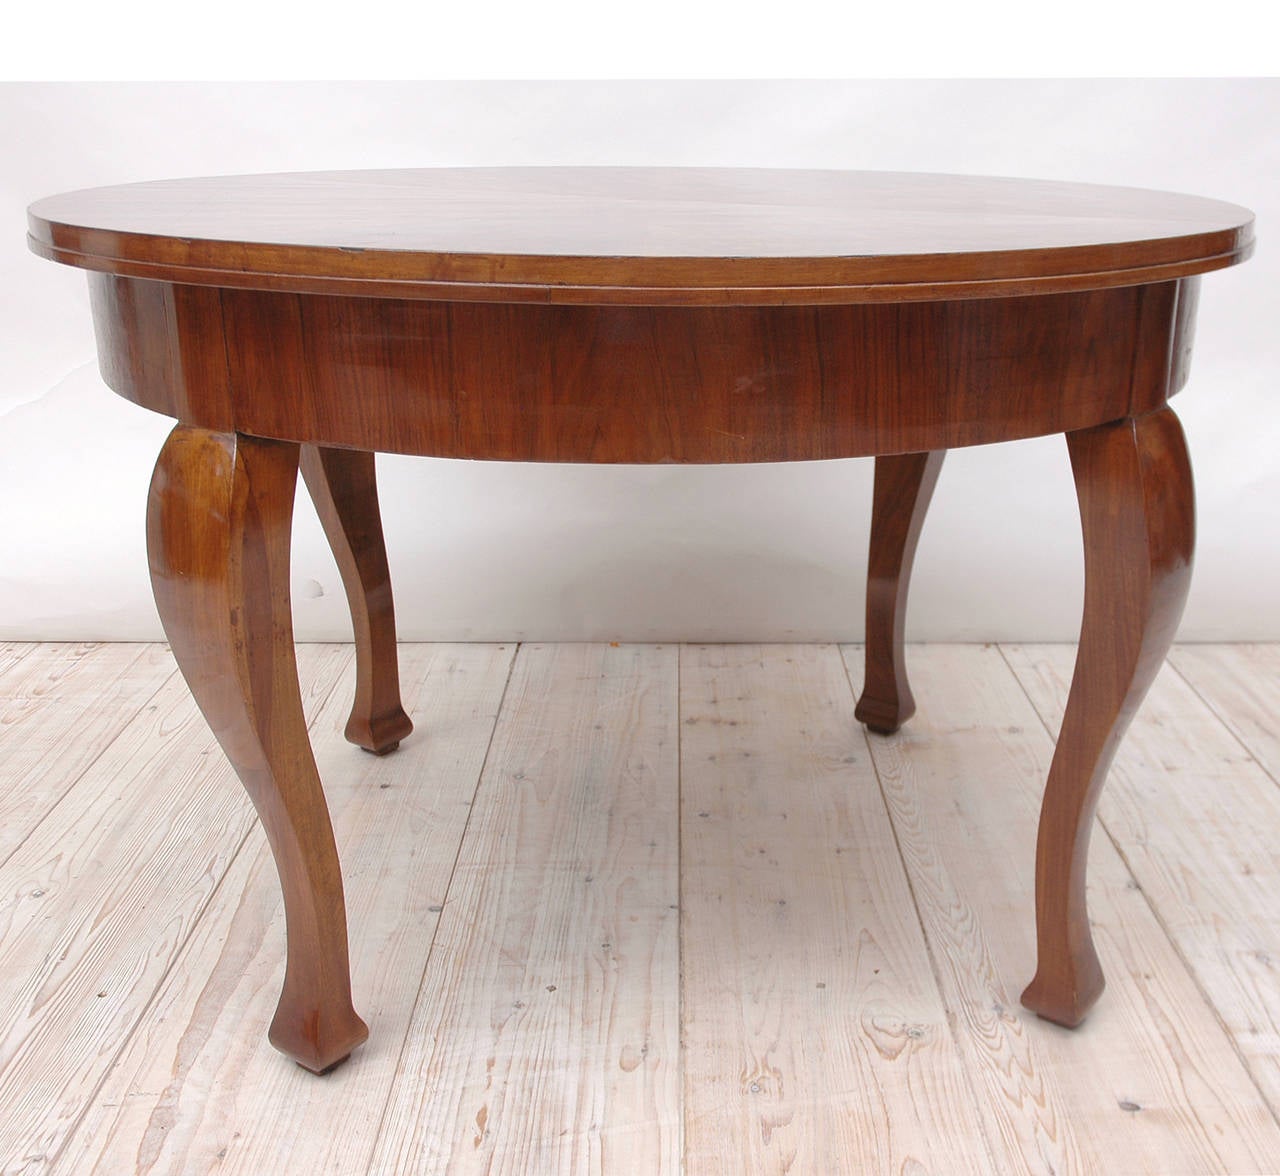 A very beautifully designed and well-crafted French Art Deco round table in walnut with figured walnut top. Offers a fresh and classic look with stream-lined design and a focus on the sumptuous play of figured wood grains. May be used as a center